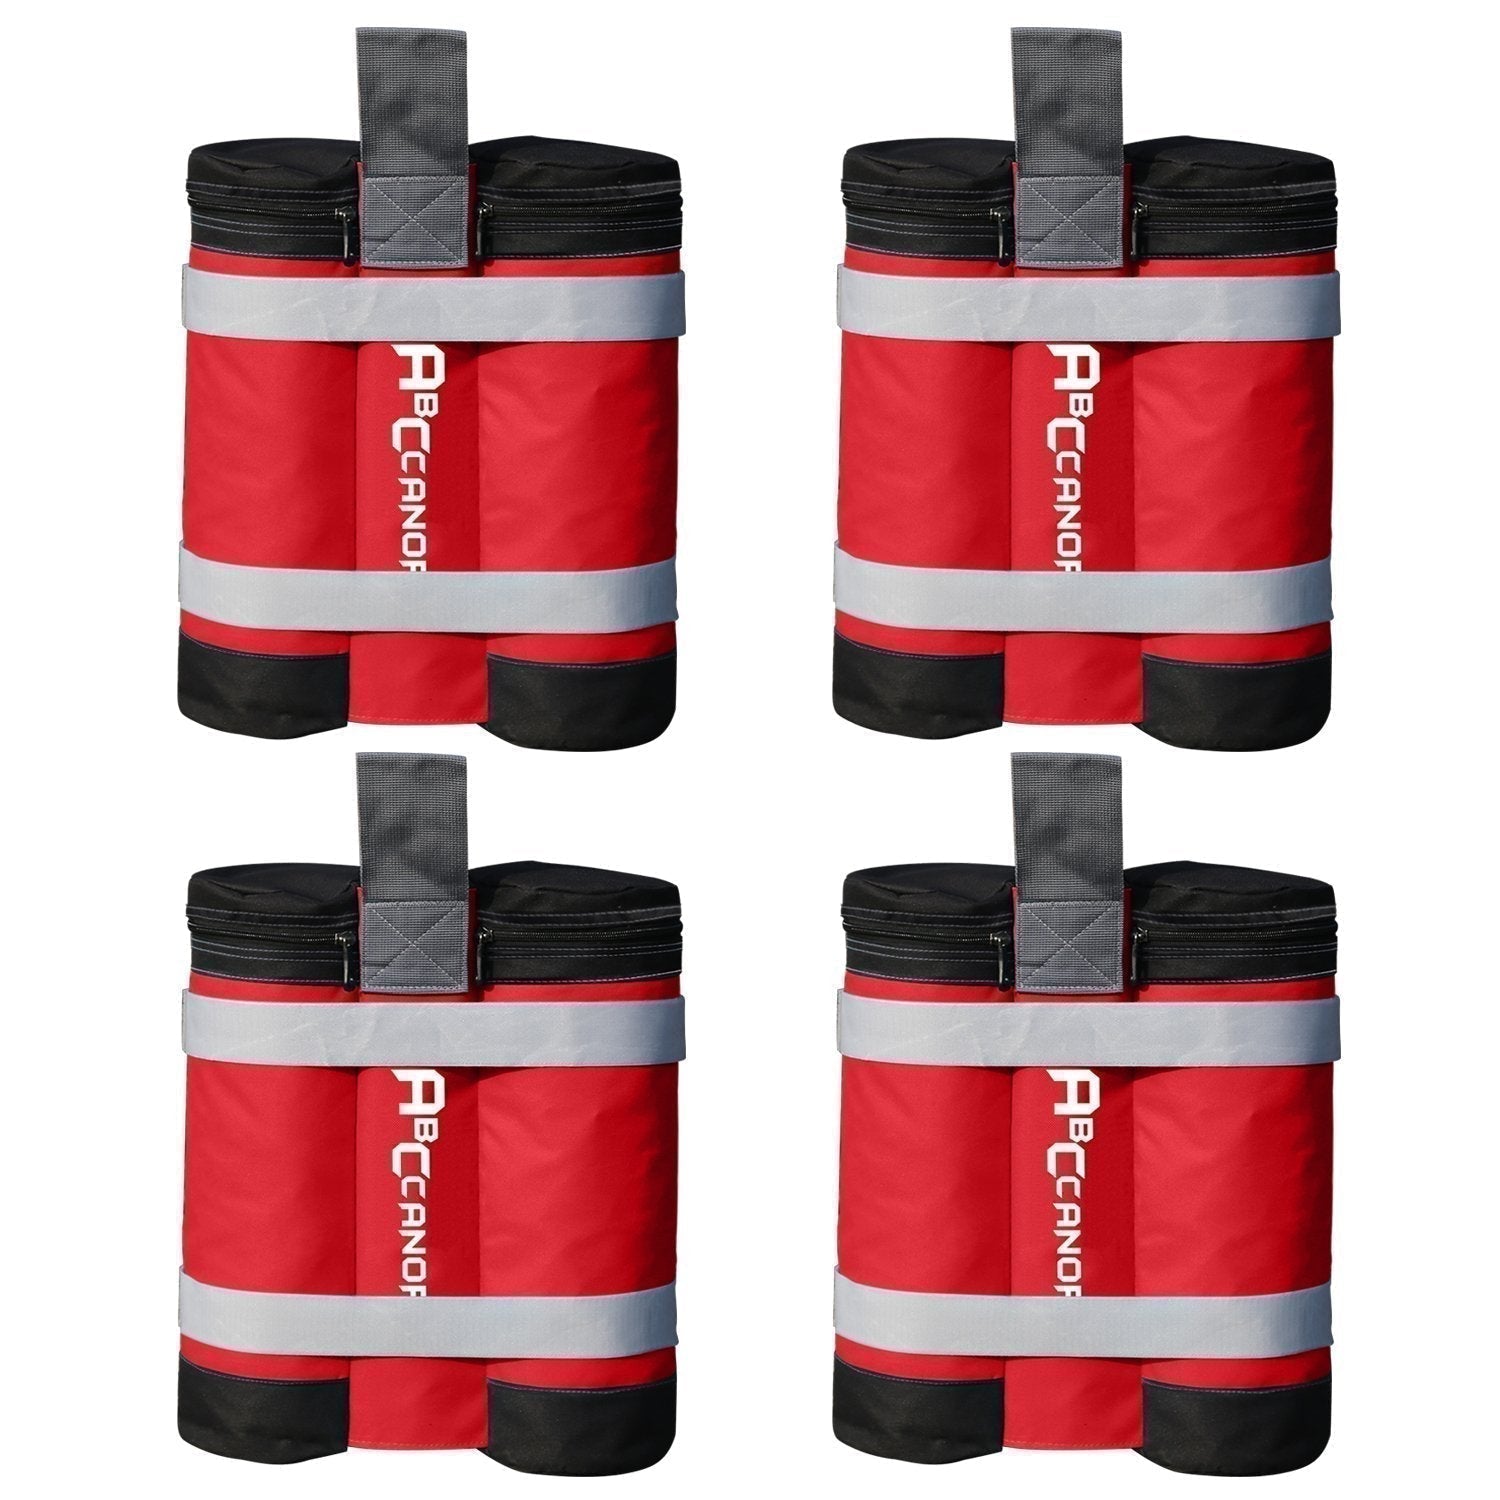 New Weight Bag-4 pieces - ABC-CANOPY